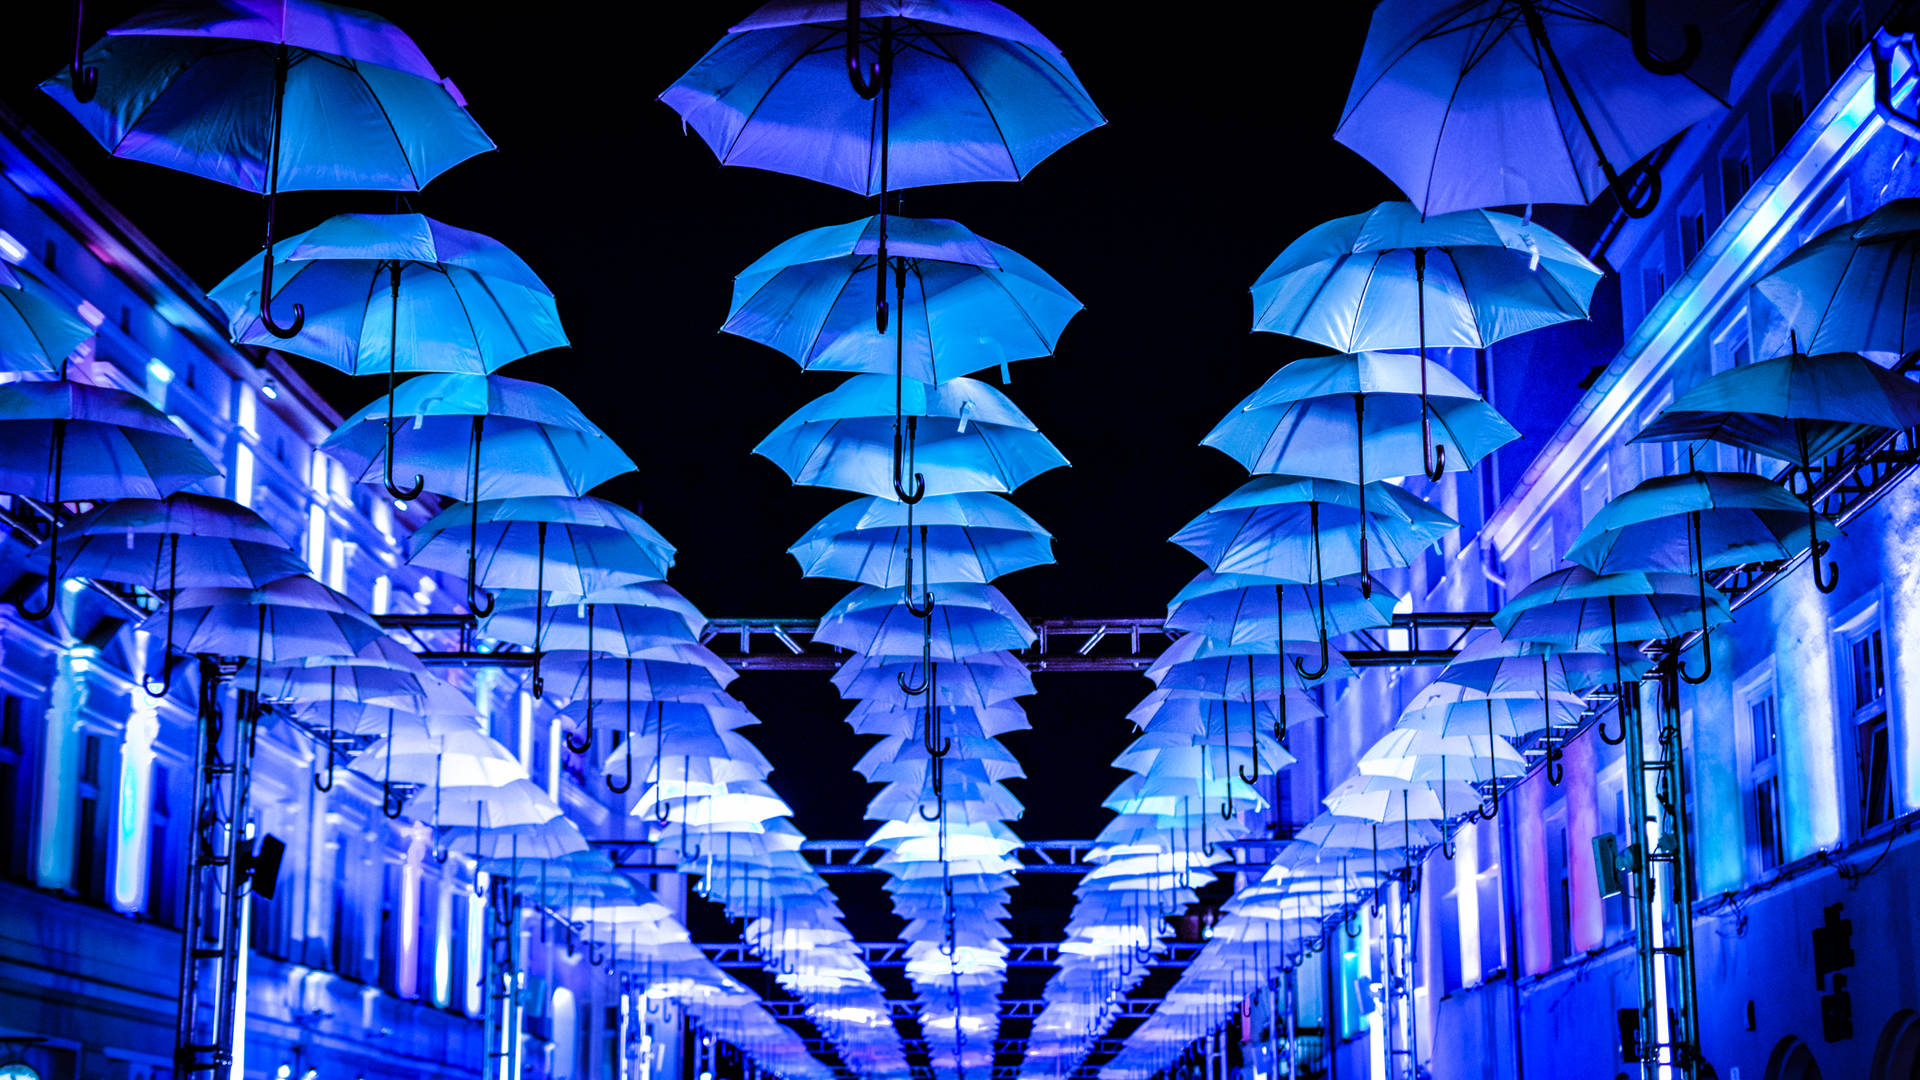 Blue Umbrellas On The Ceiling Wallpaper